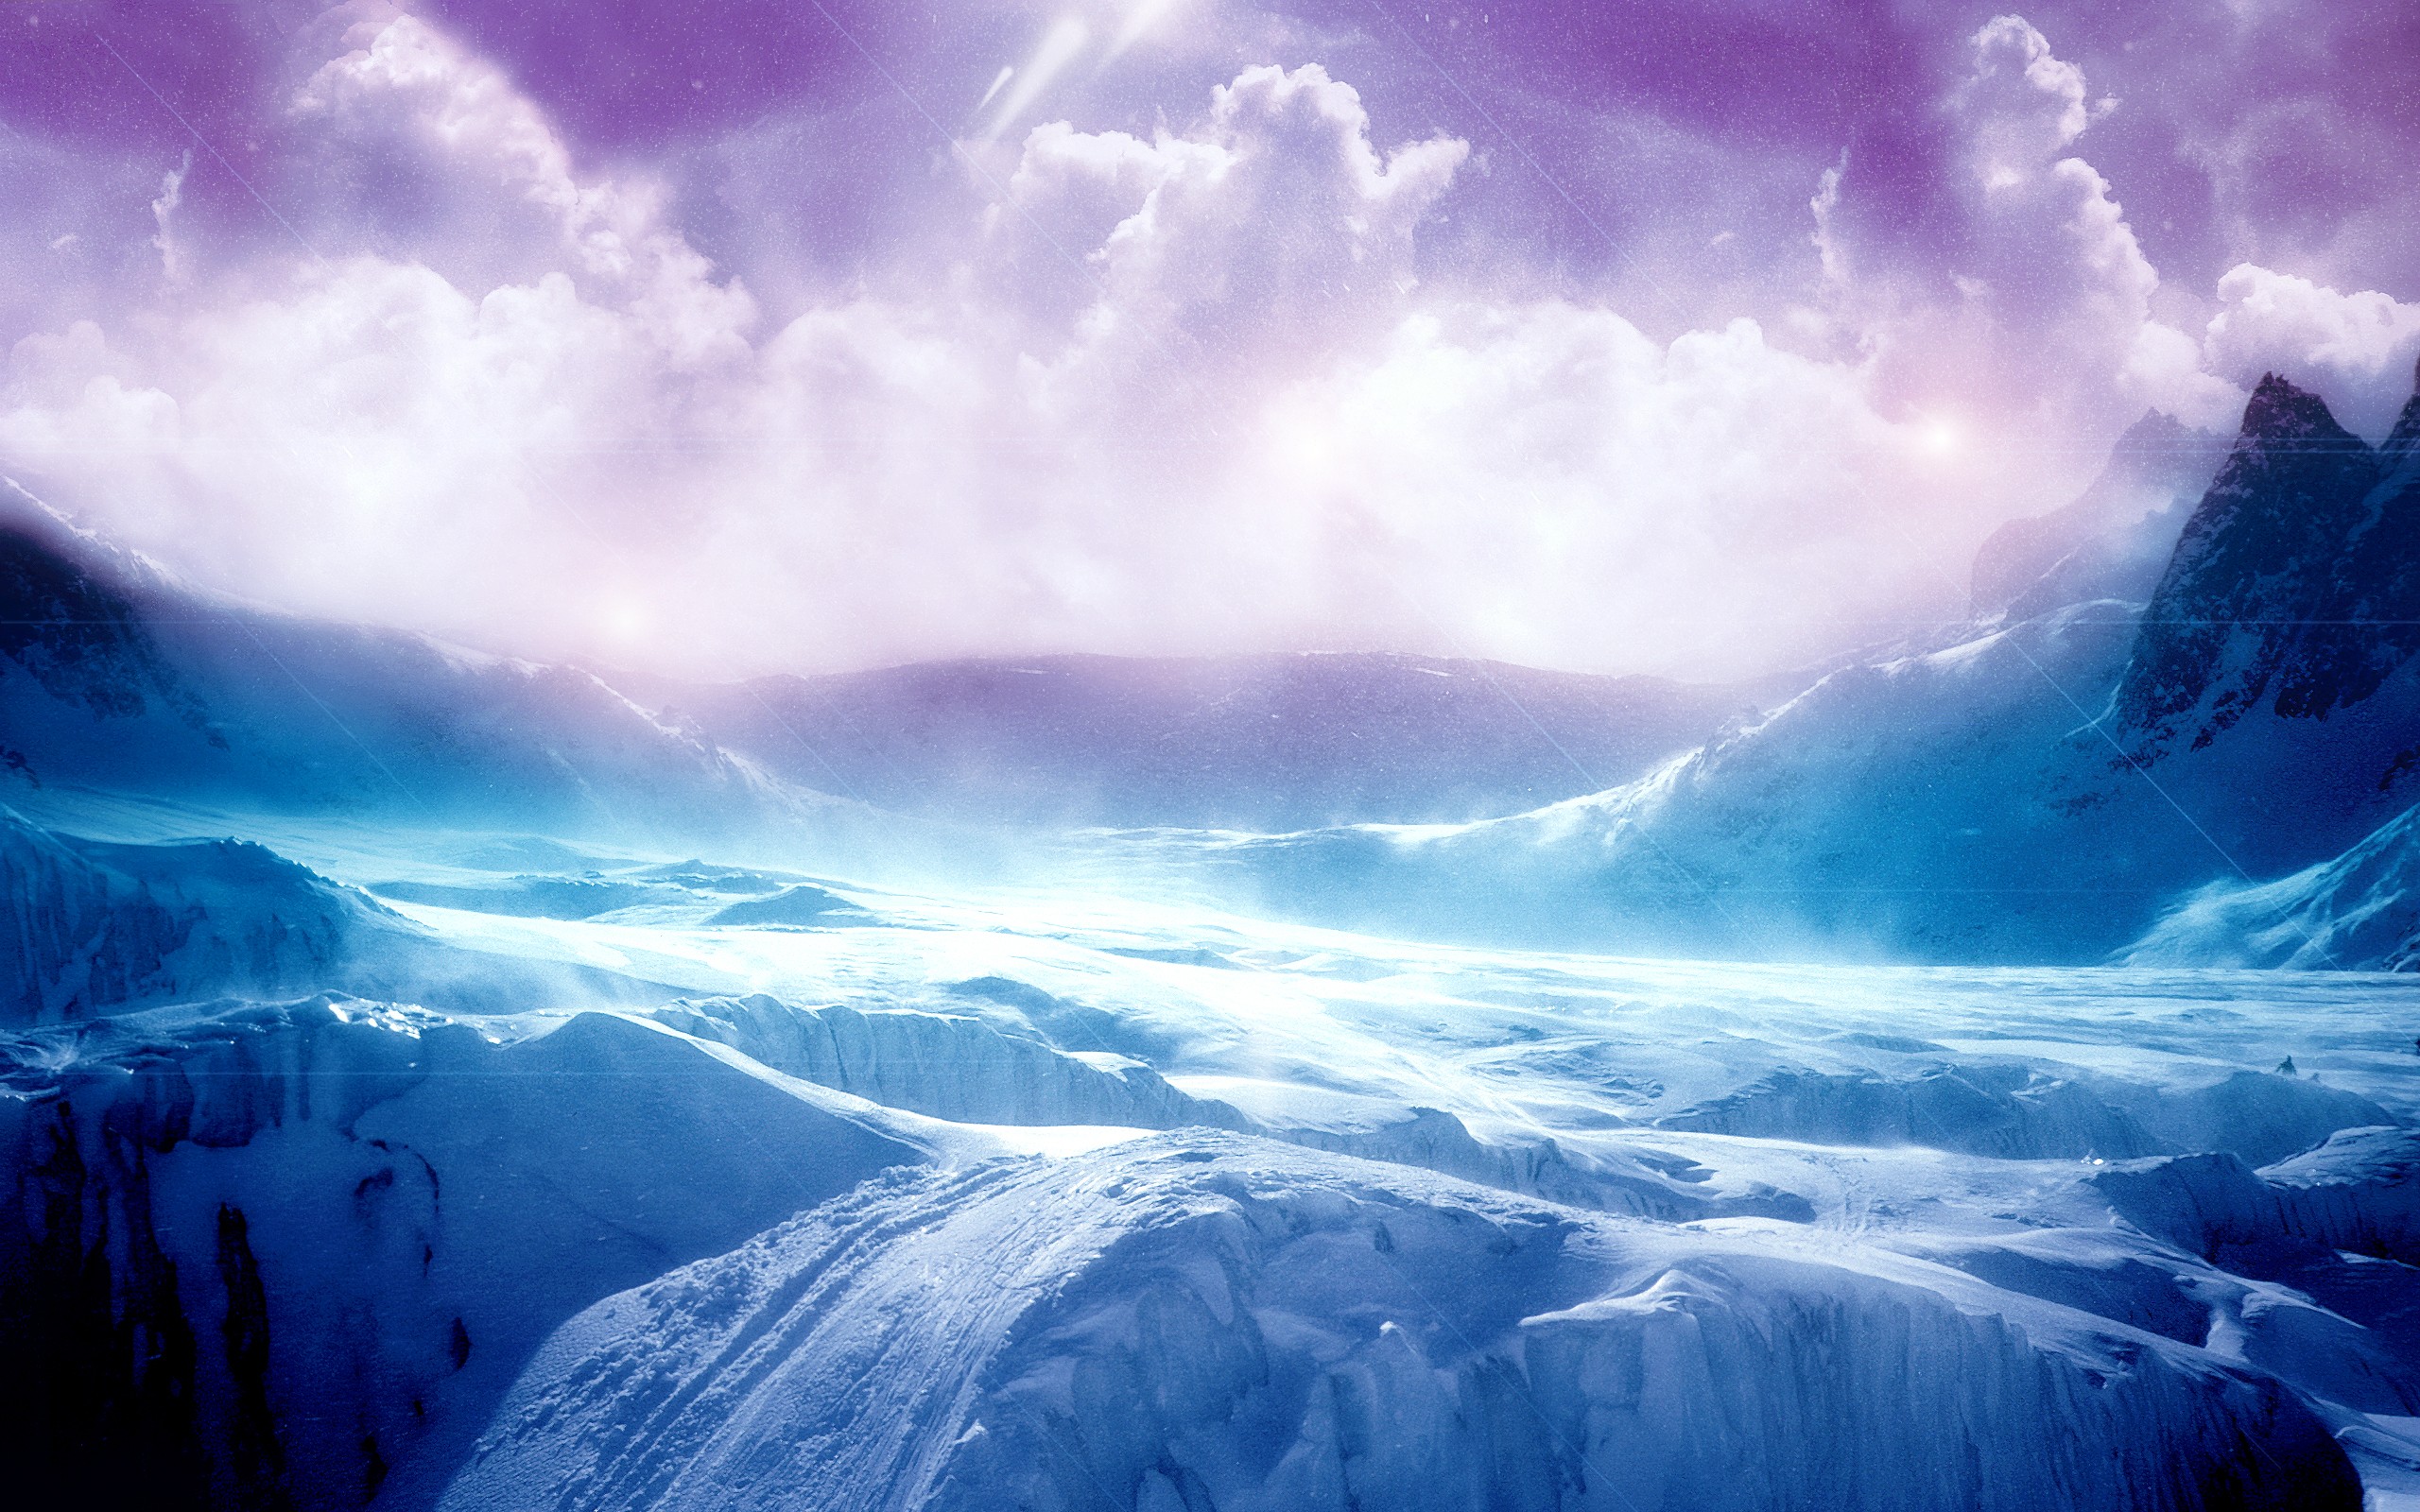 General 2560x1600 sky clouds fantasy art ice cold snow winter landscape